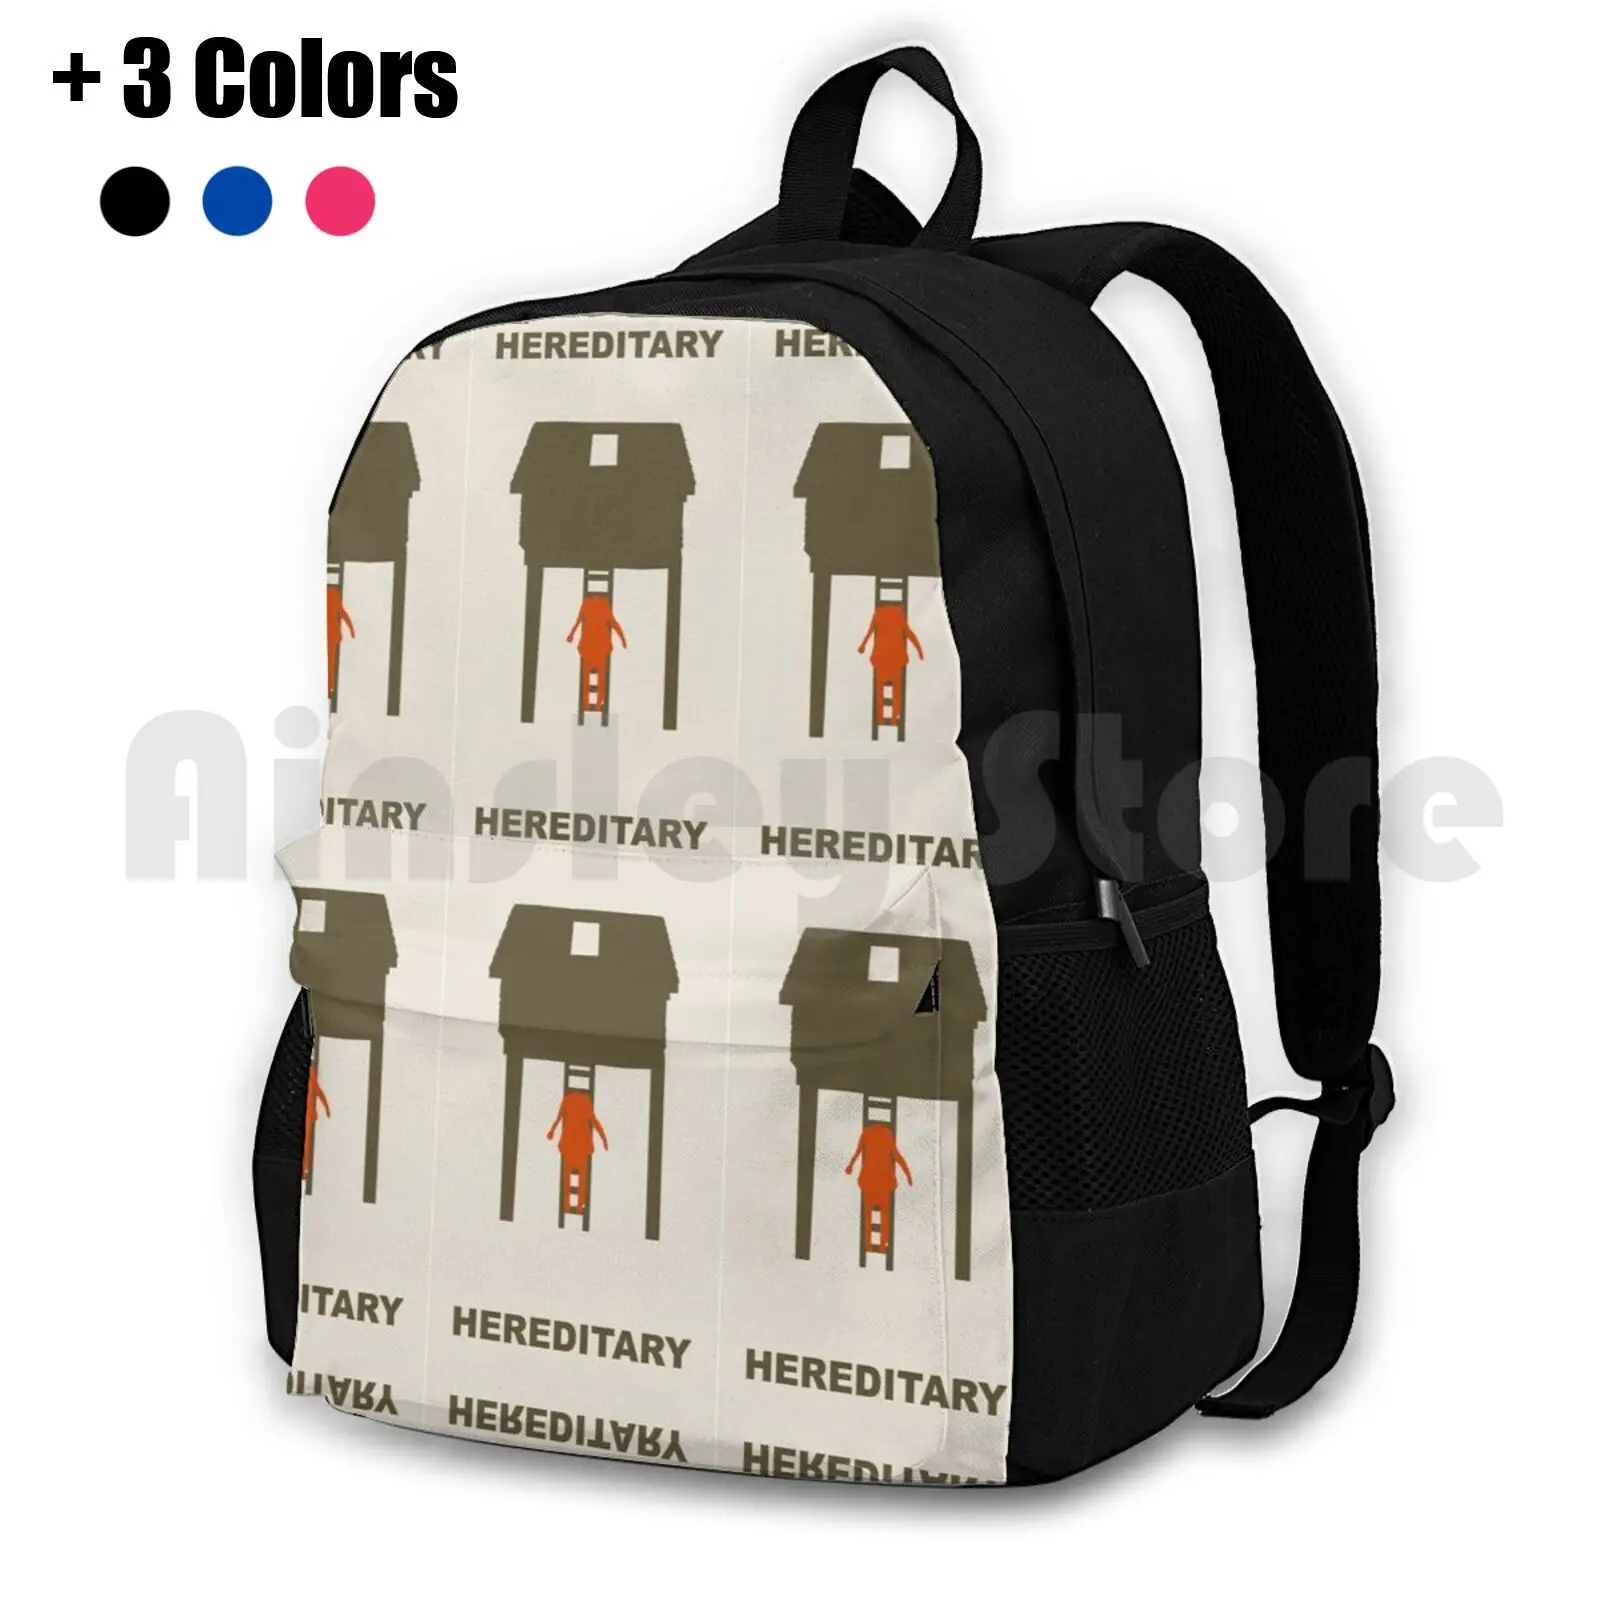 

Hereditary-Floating Poster Outdoor Hiking Backpack Riding Climbing Sports Bag Hereditary Film Movies Cinema Movie Horror Films